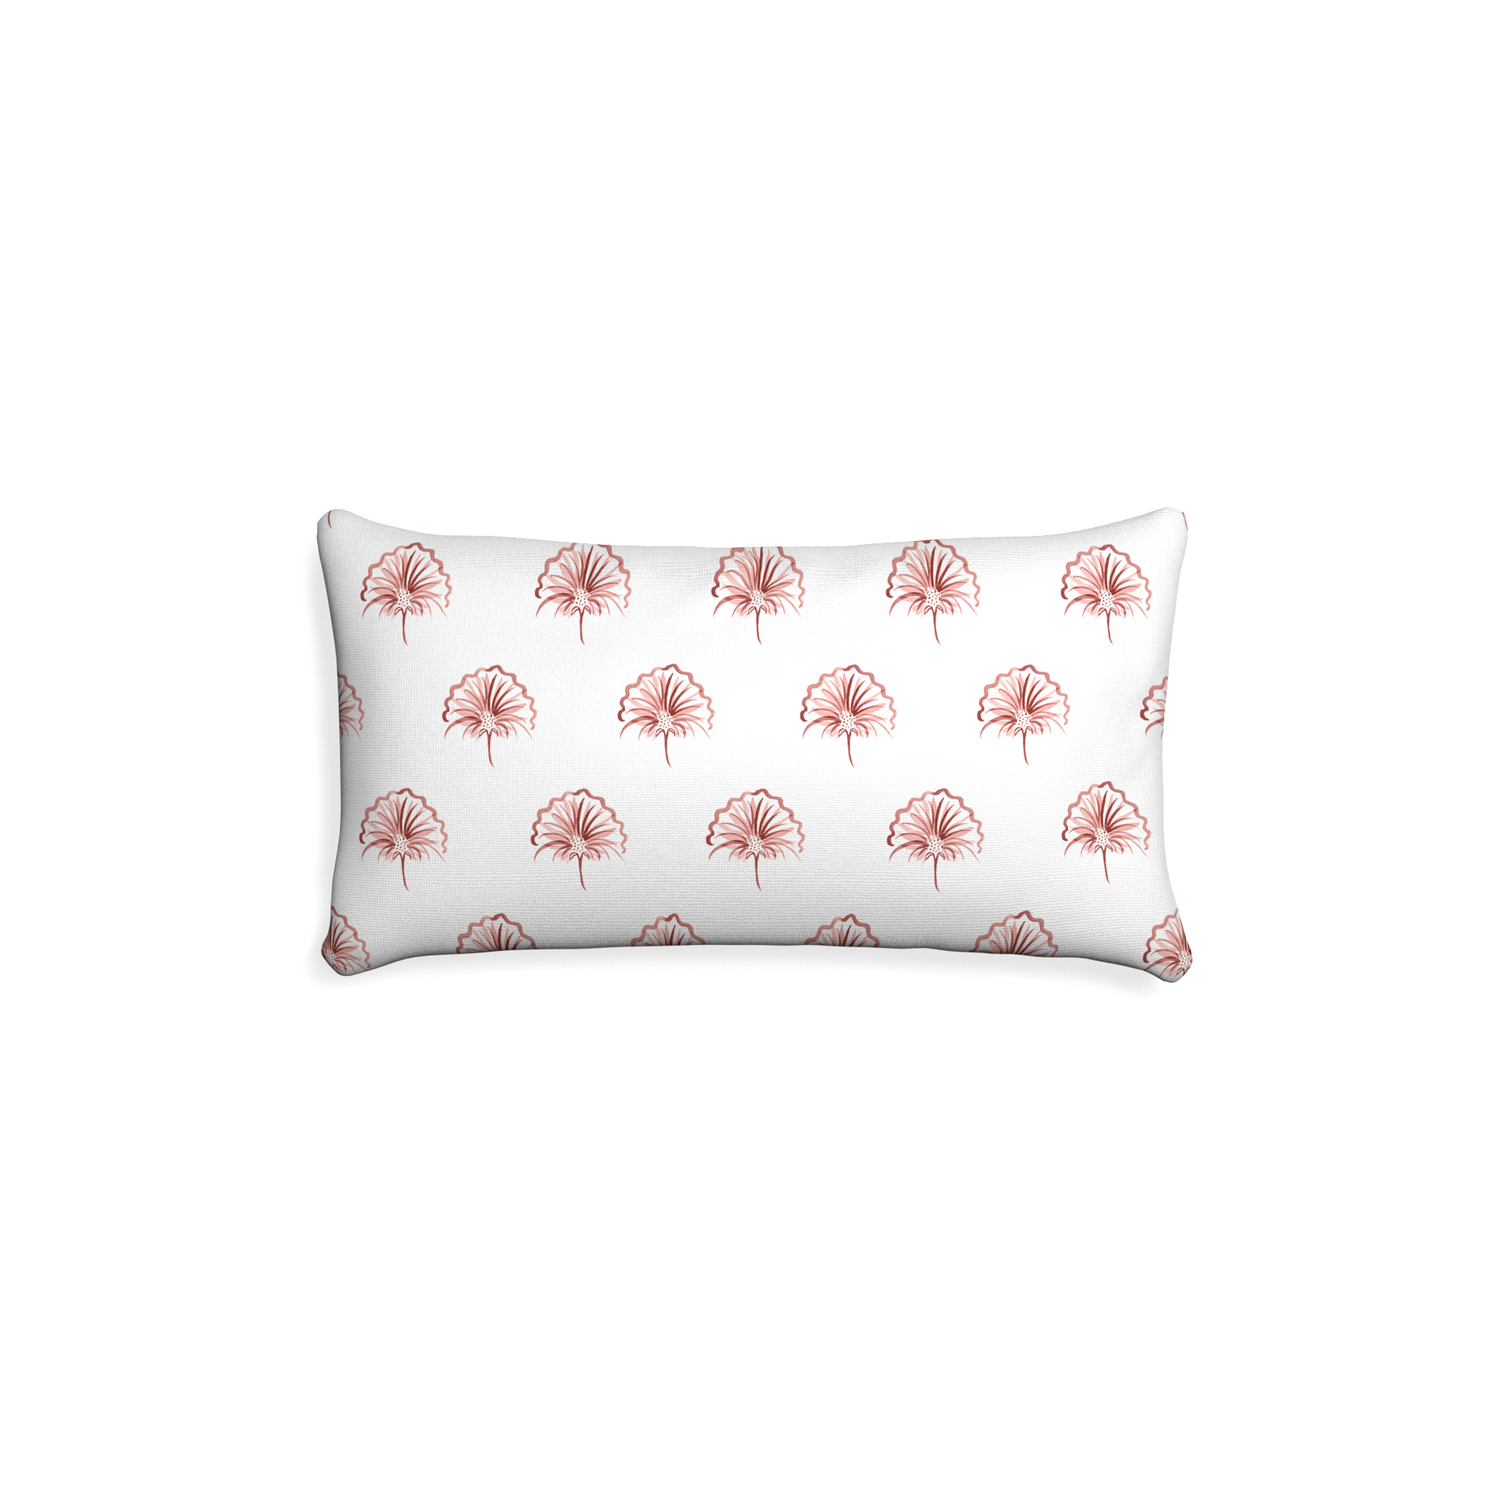 Petite-lumbar penelope rose custom floral pinkpillow with none on white background